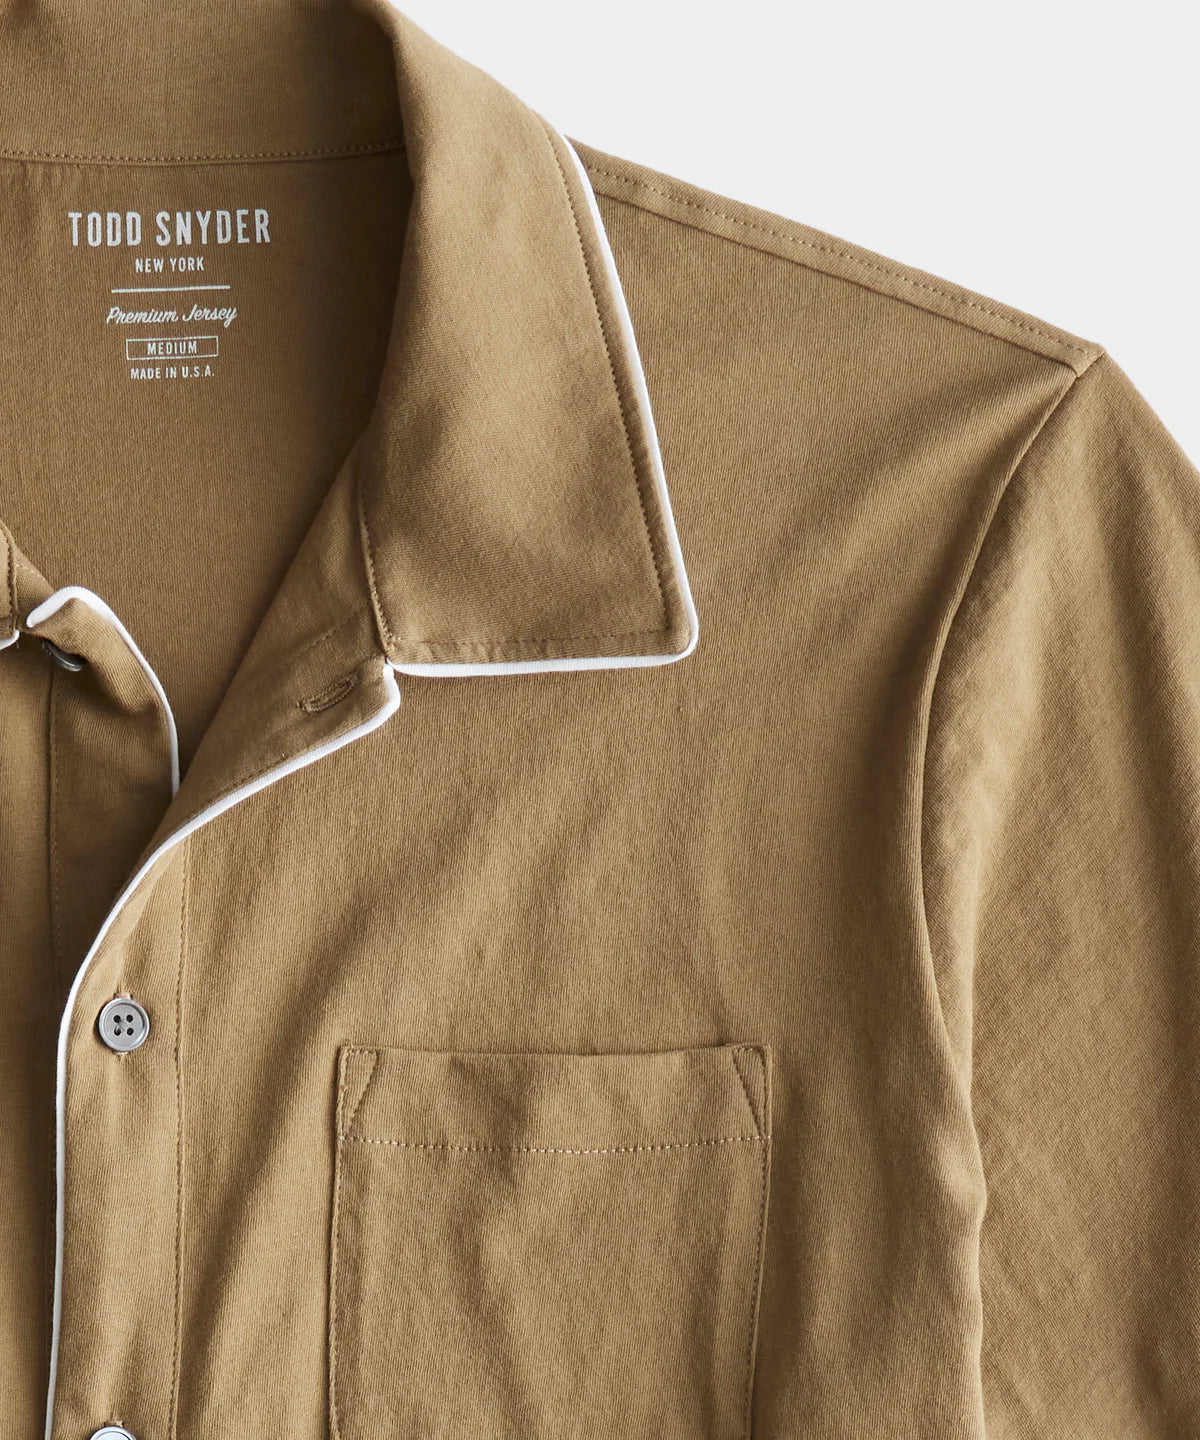 Todd Snyder - TODD SNYDER MONTAUK TIPPED FULL PLACKET POLO IN PINE CONE - Rent With Thred